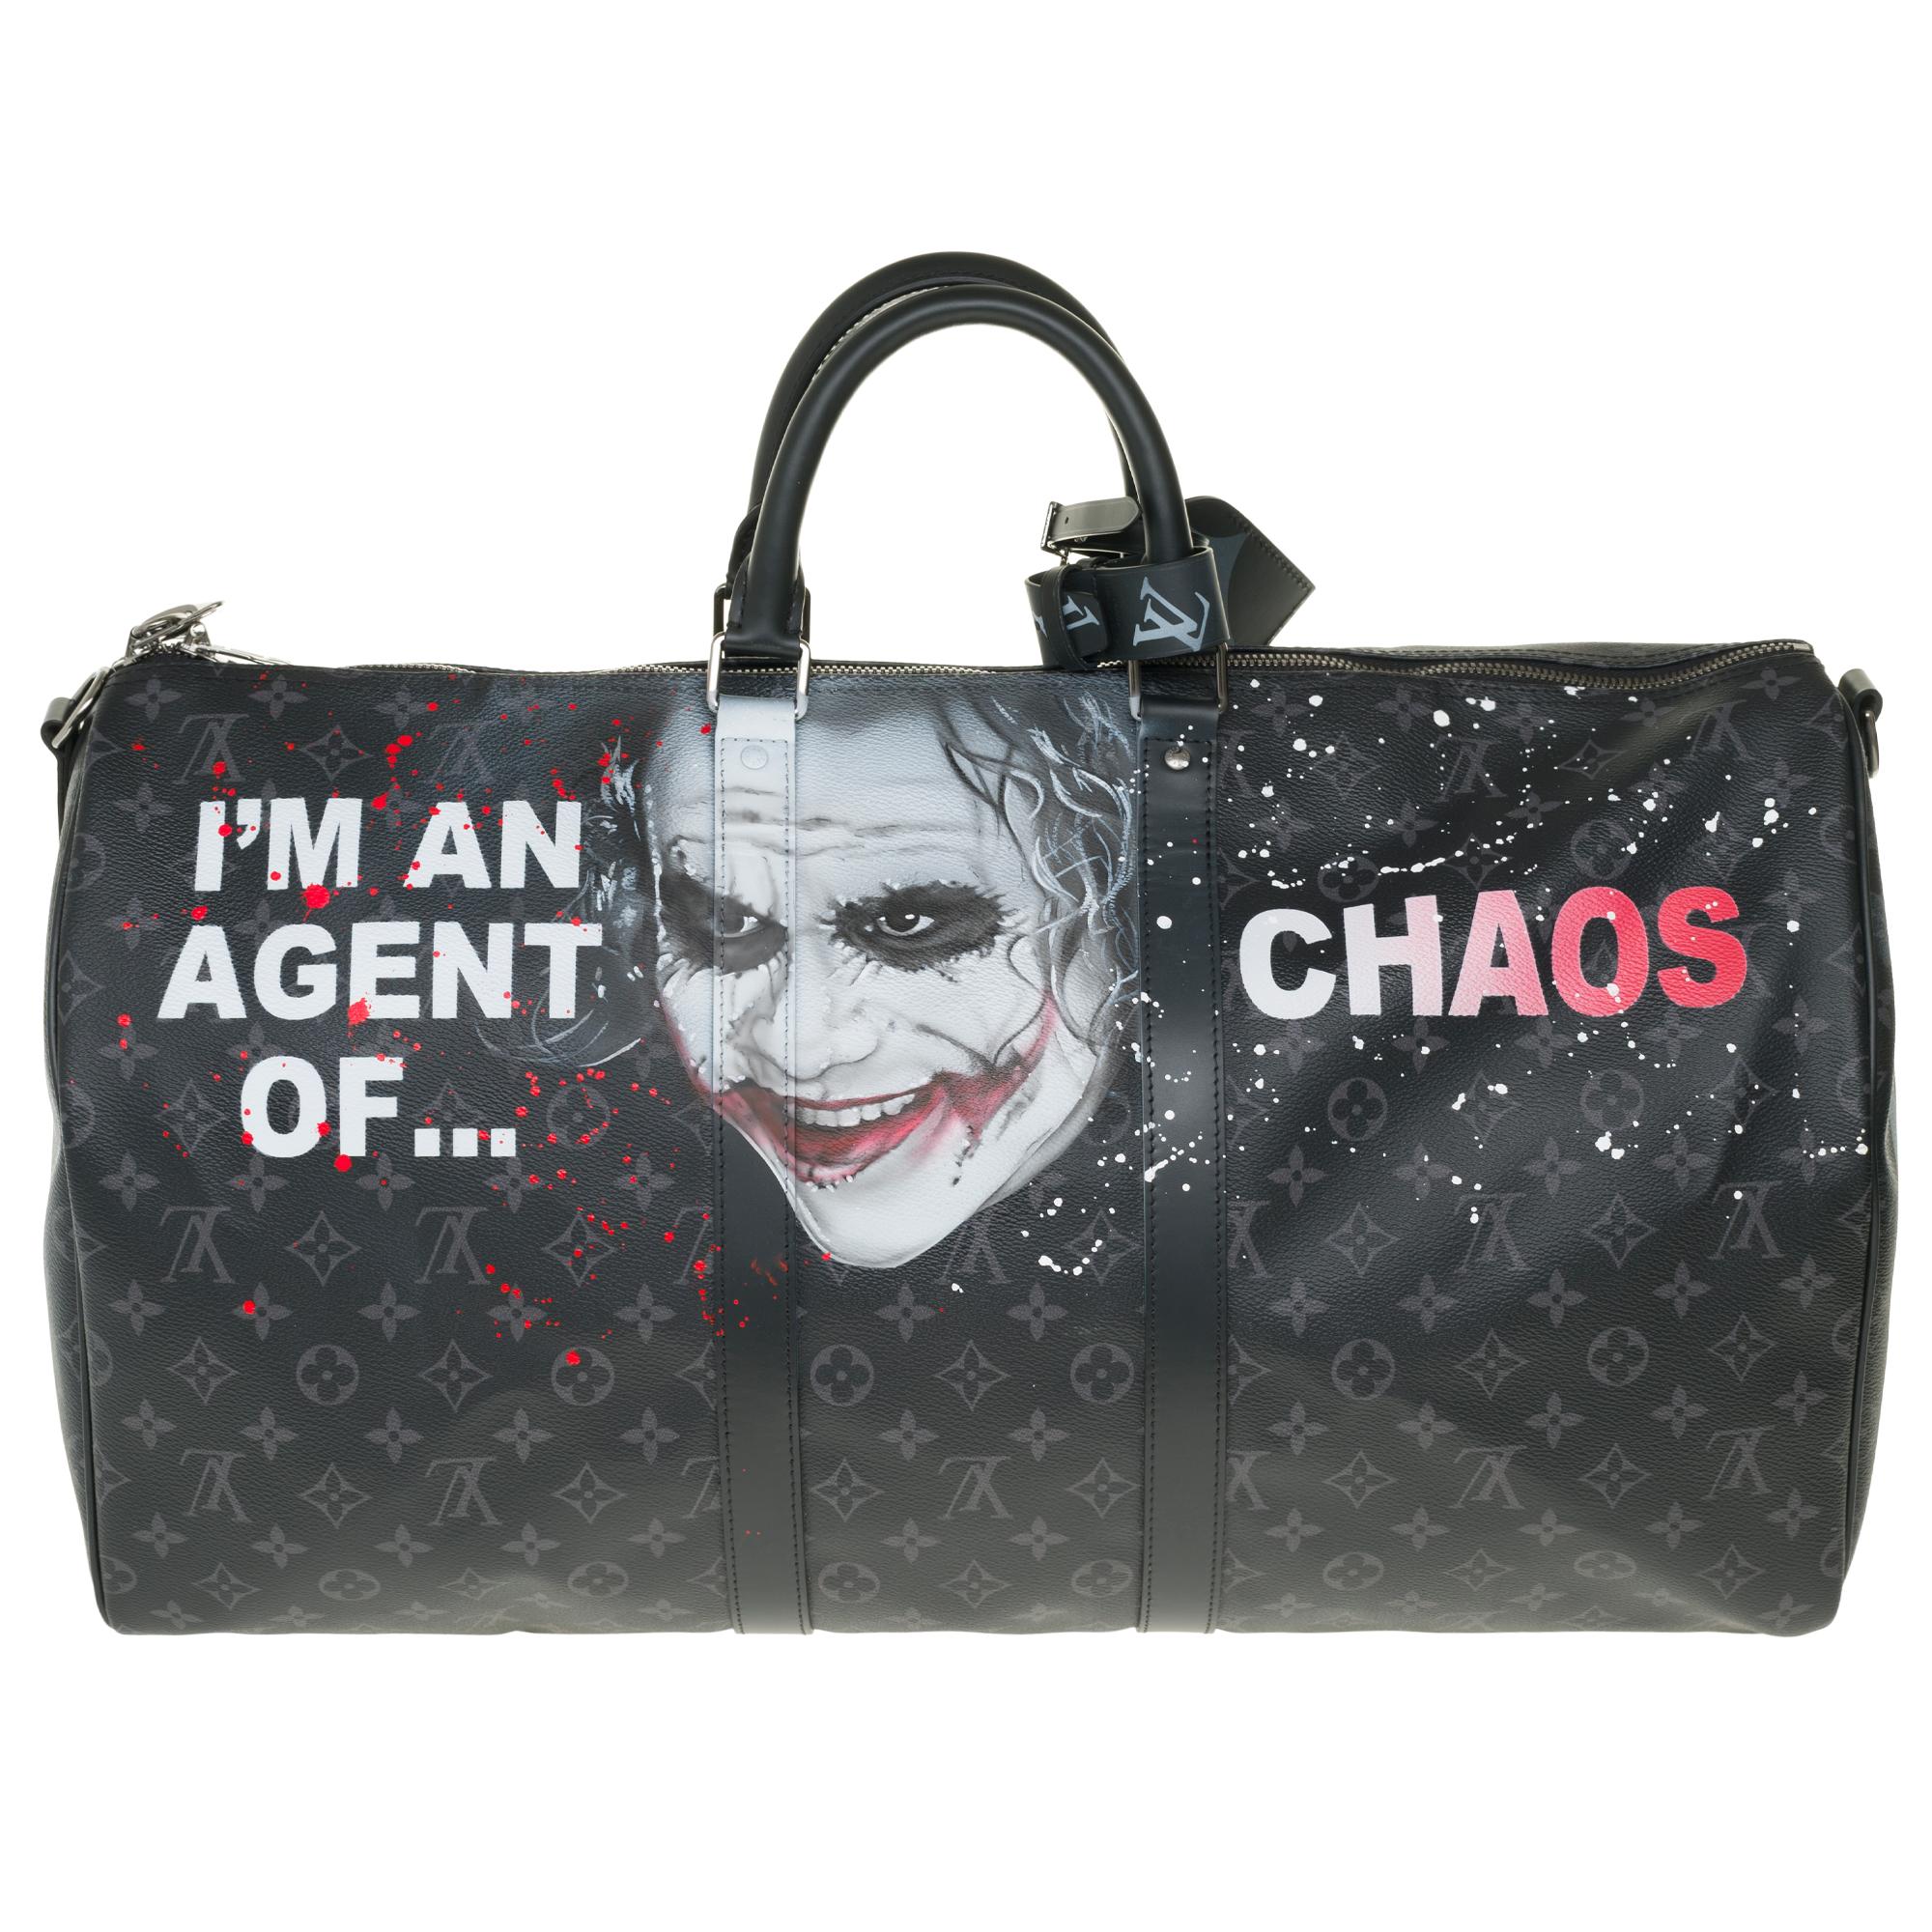 This announcement is only for lovers of art and unique pieces, masterpieces because this is not only a bag but a unique piece incomparable.

The PatBo artist fascinated by the opponents that are Batman and Joker and the black universe of Gotham City